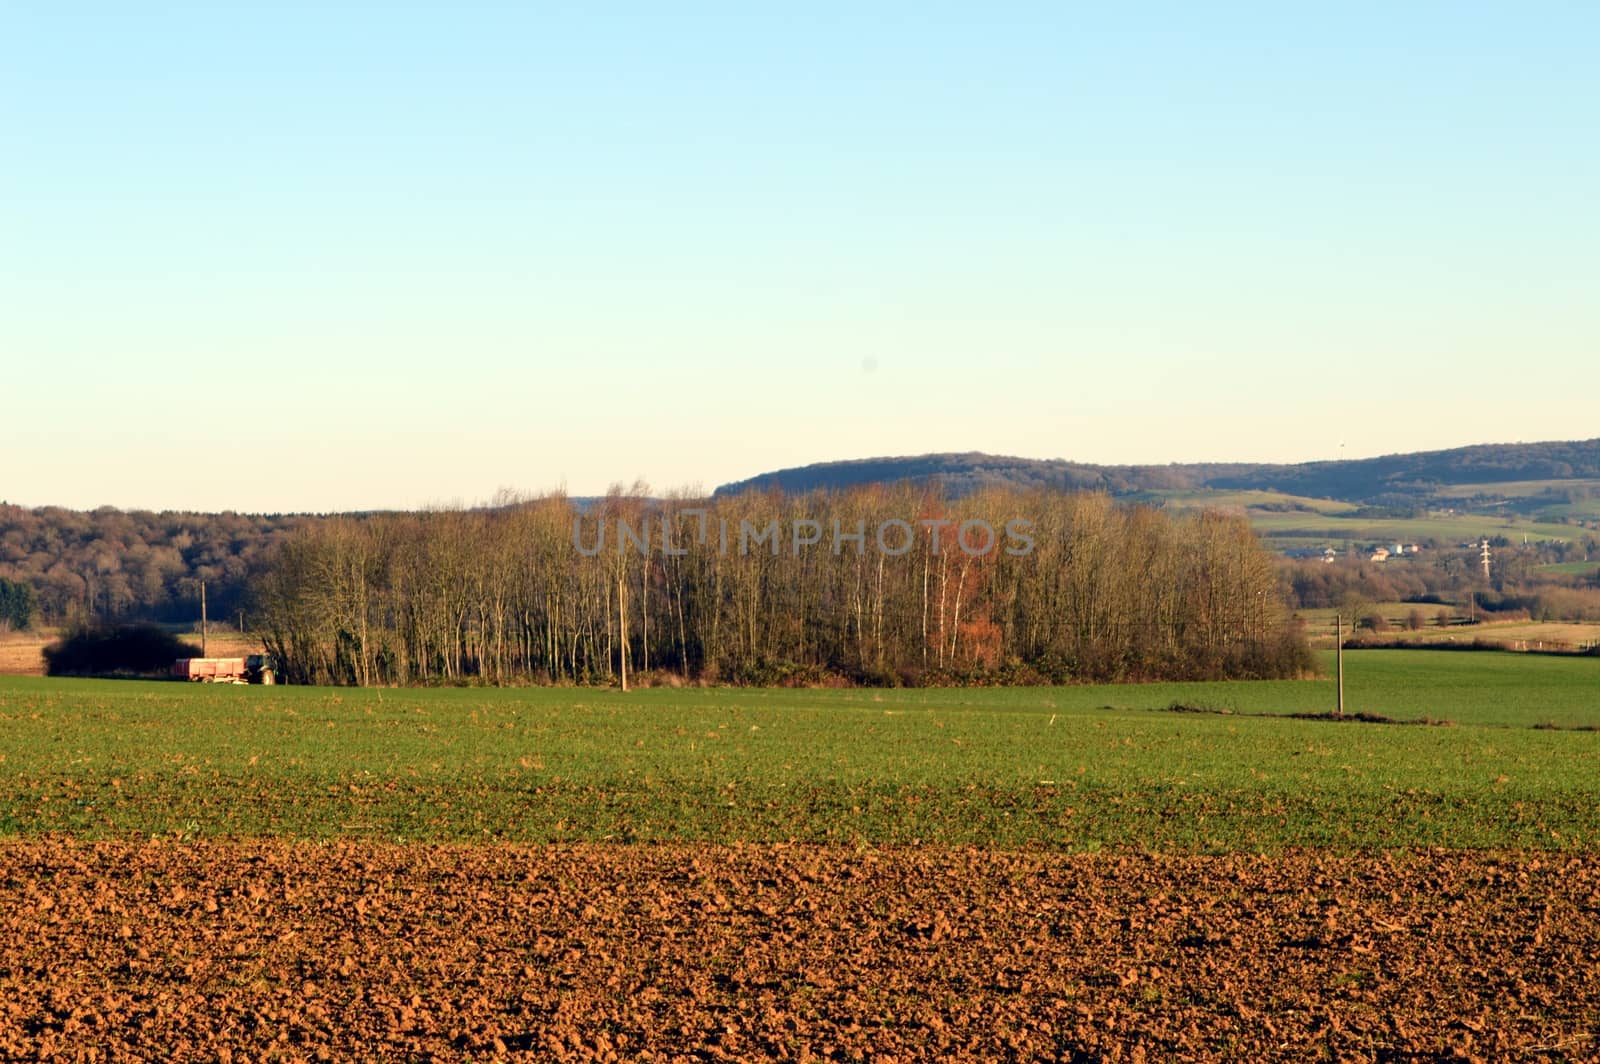 Plowed field and young thumb with a grove of trees in the background